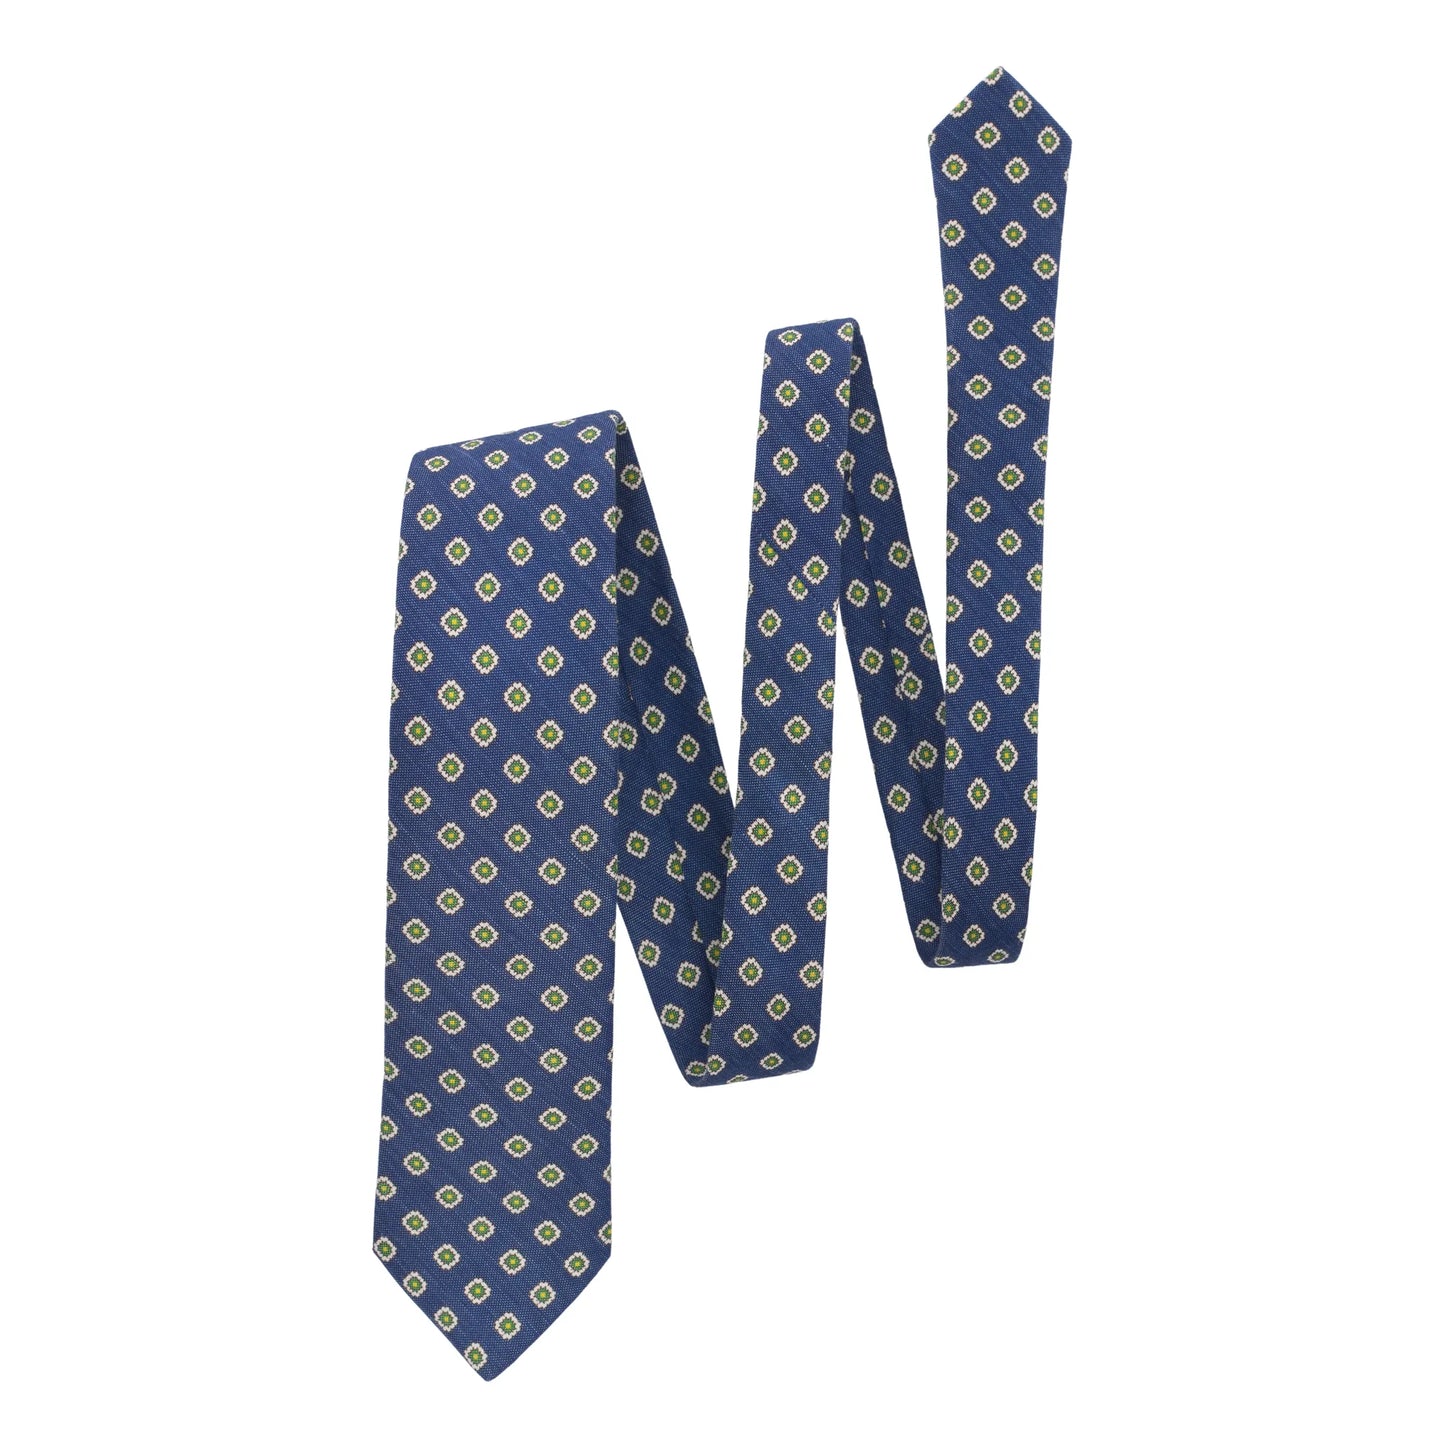 Printed Silk and Linen Blue Tie